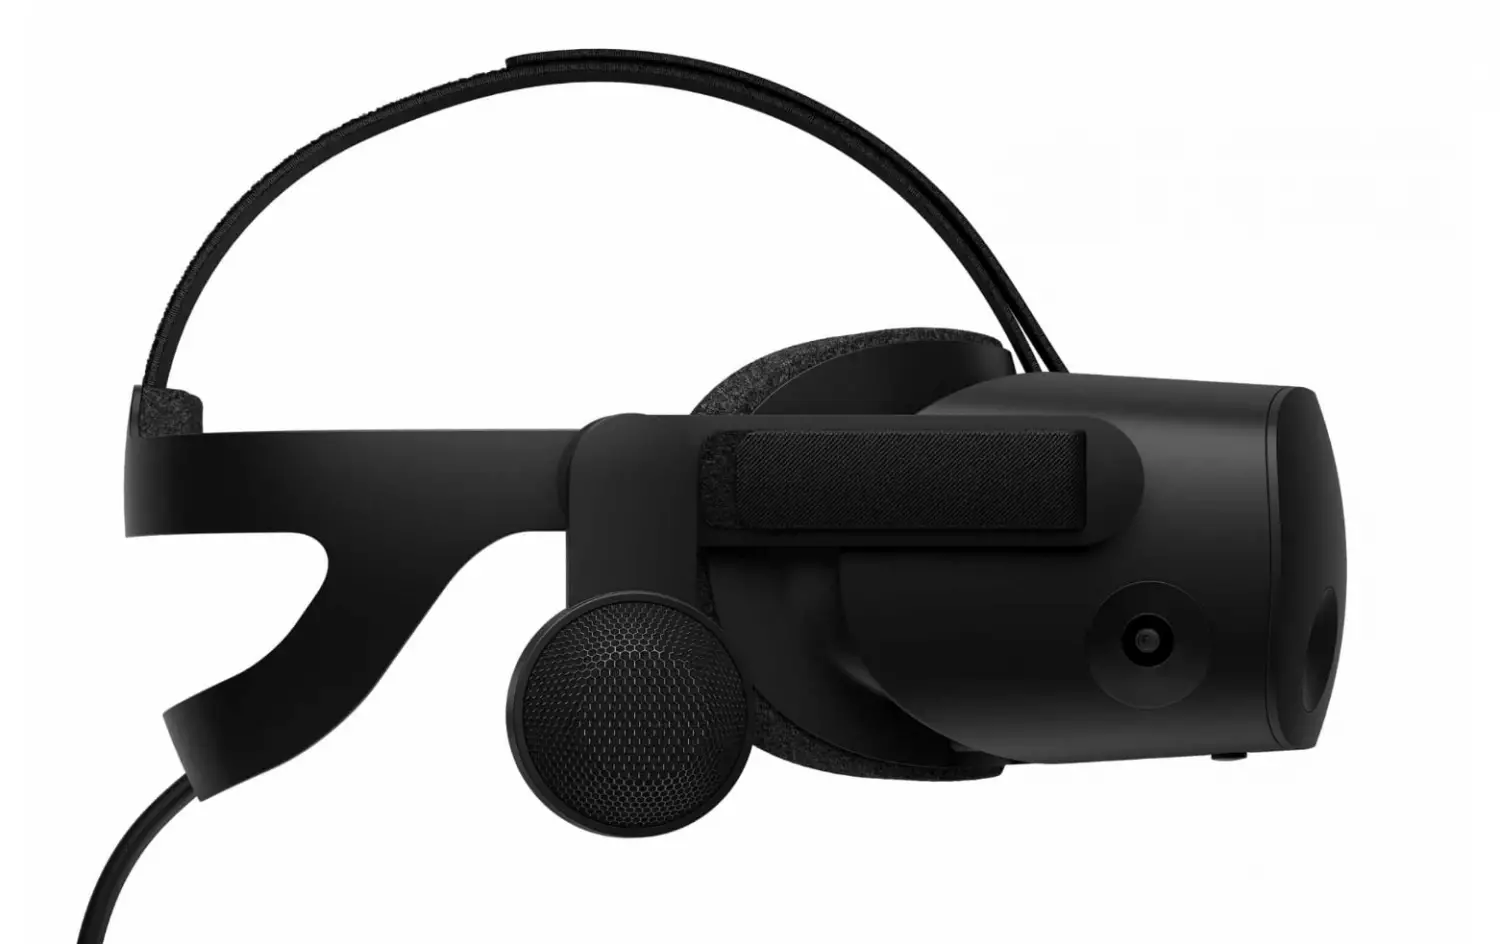 HP plans to ship Reverb G2 VR headsets in the month of November